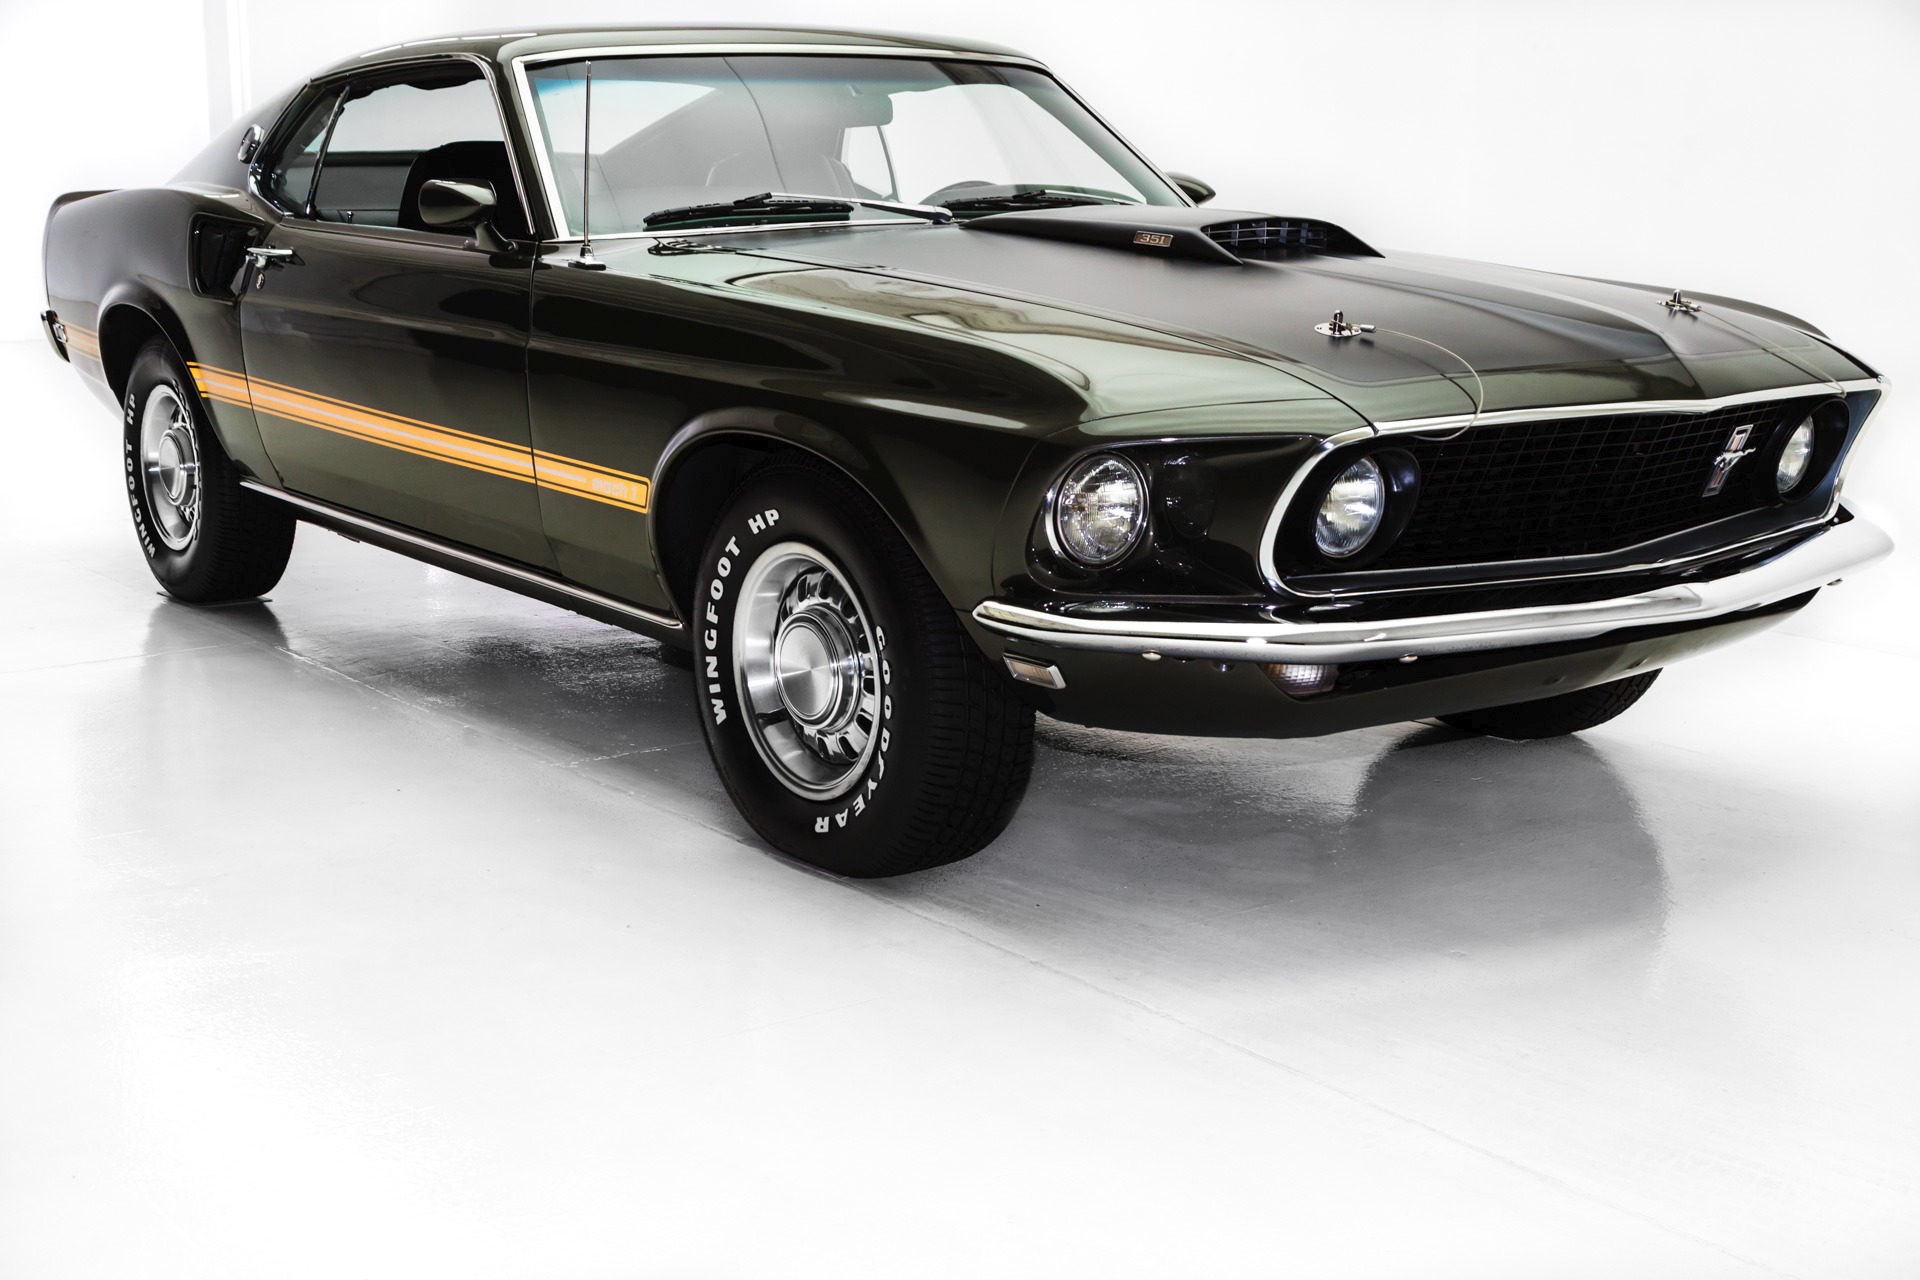 Olive Green 1969 Ford Mustang